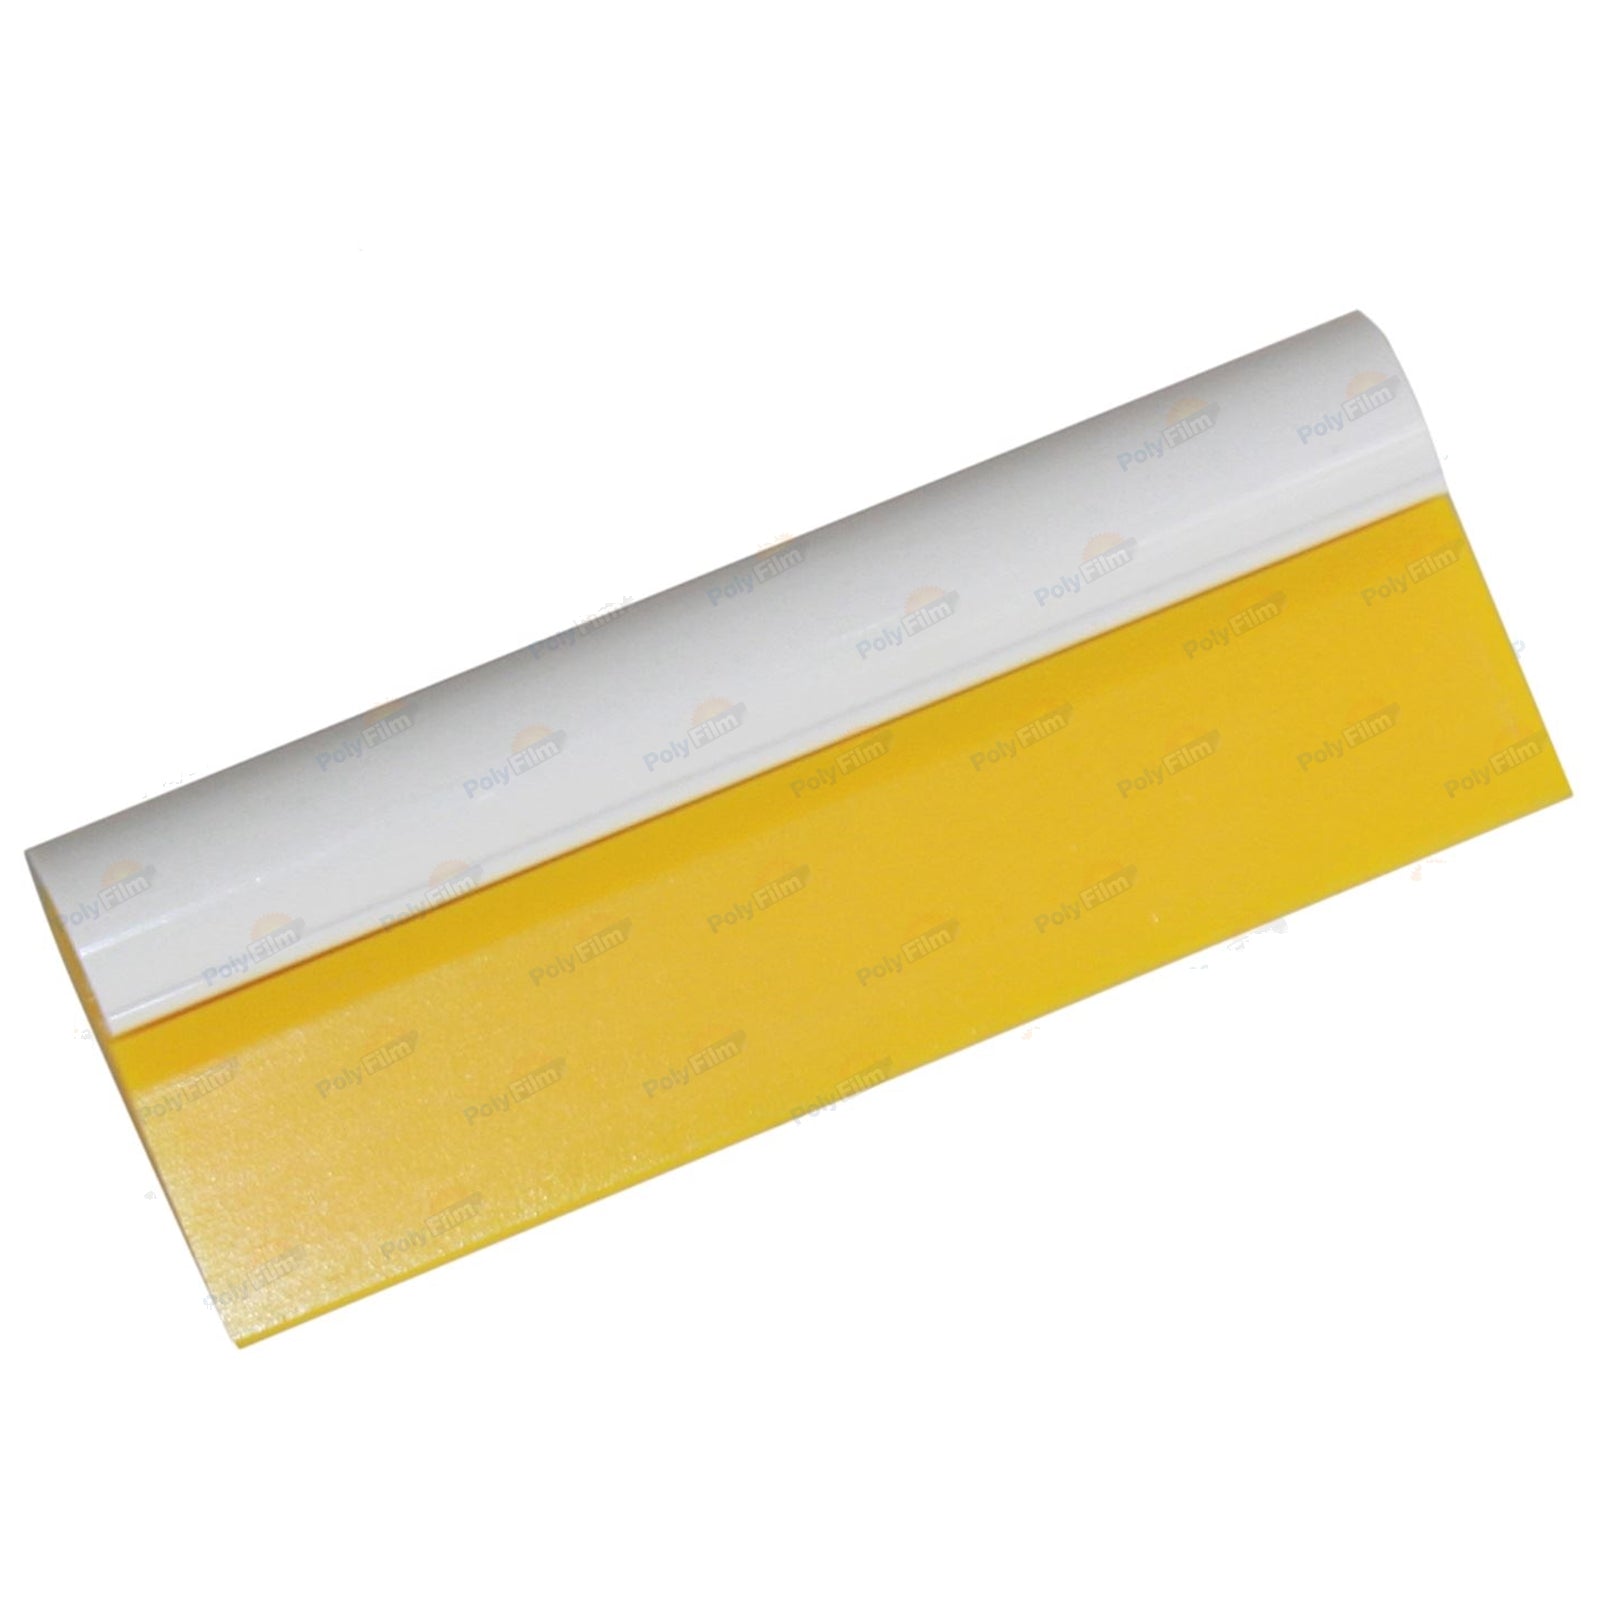 PPF Large Yellow Turbo Squeegee (140mm)